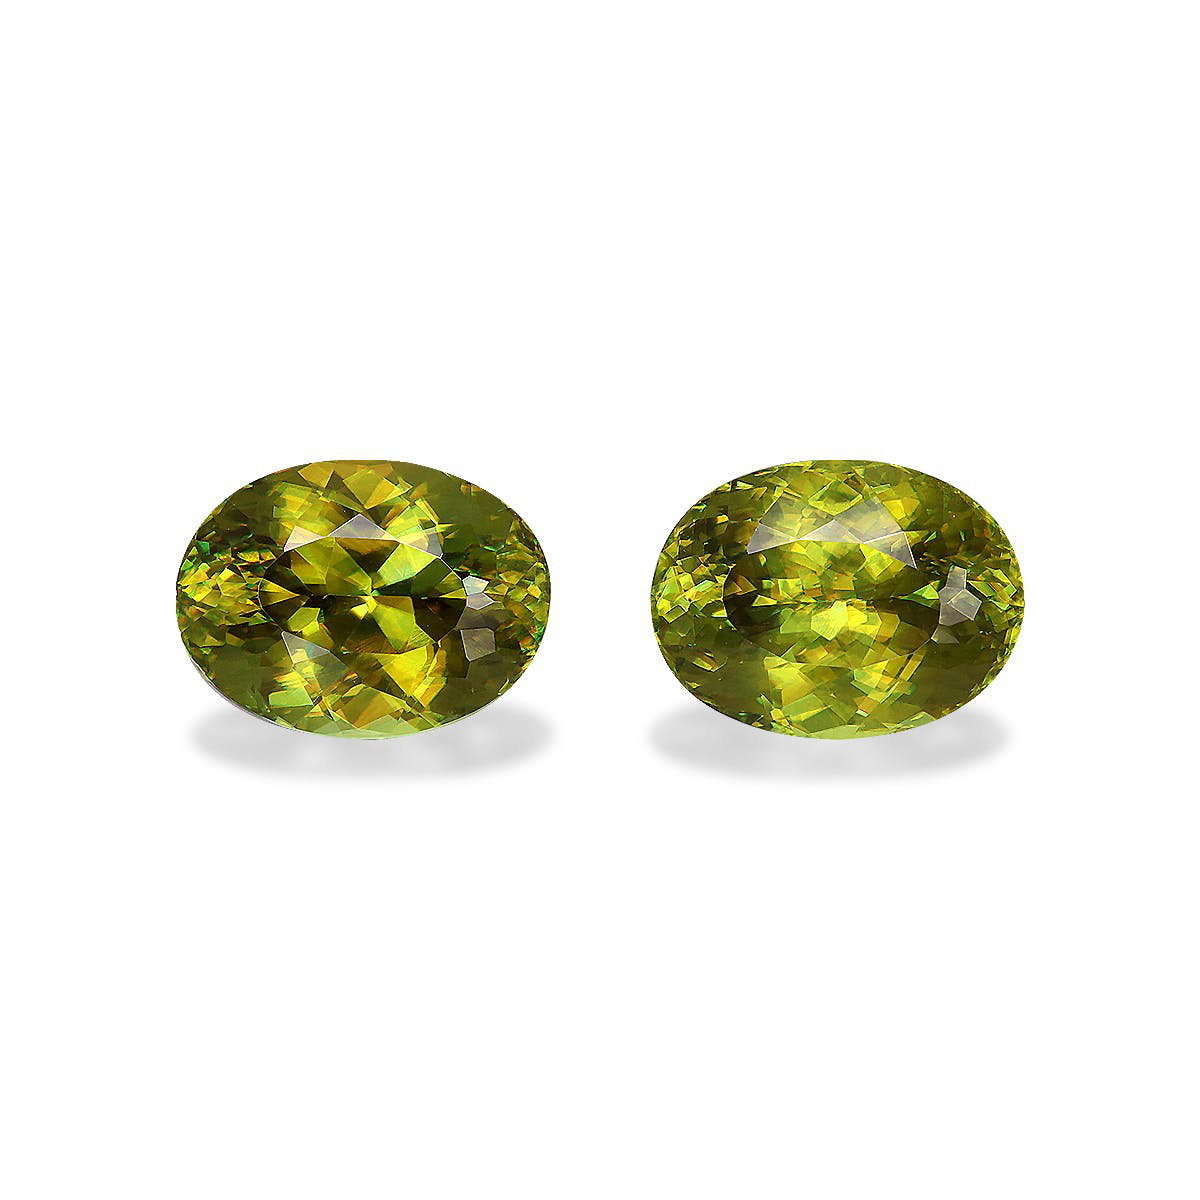 Picture of Lime Green Sphene 10.55ct - Pair (SH1082)